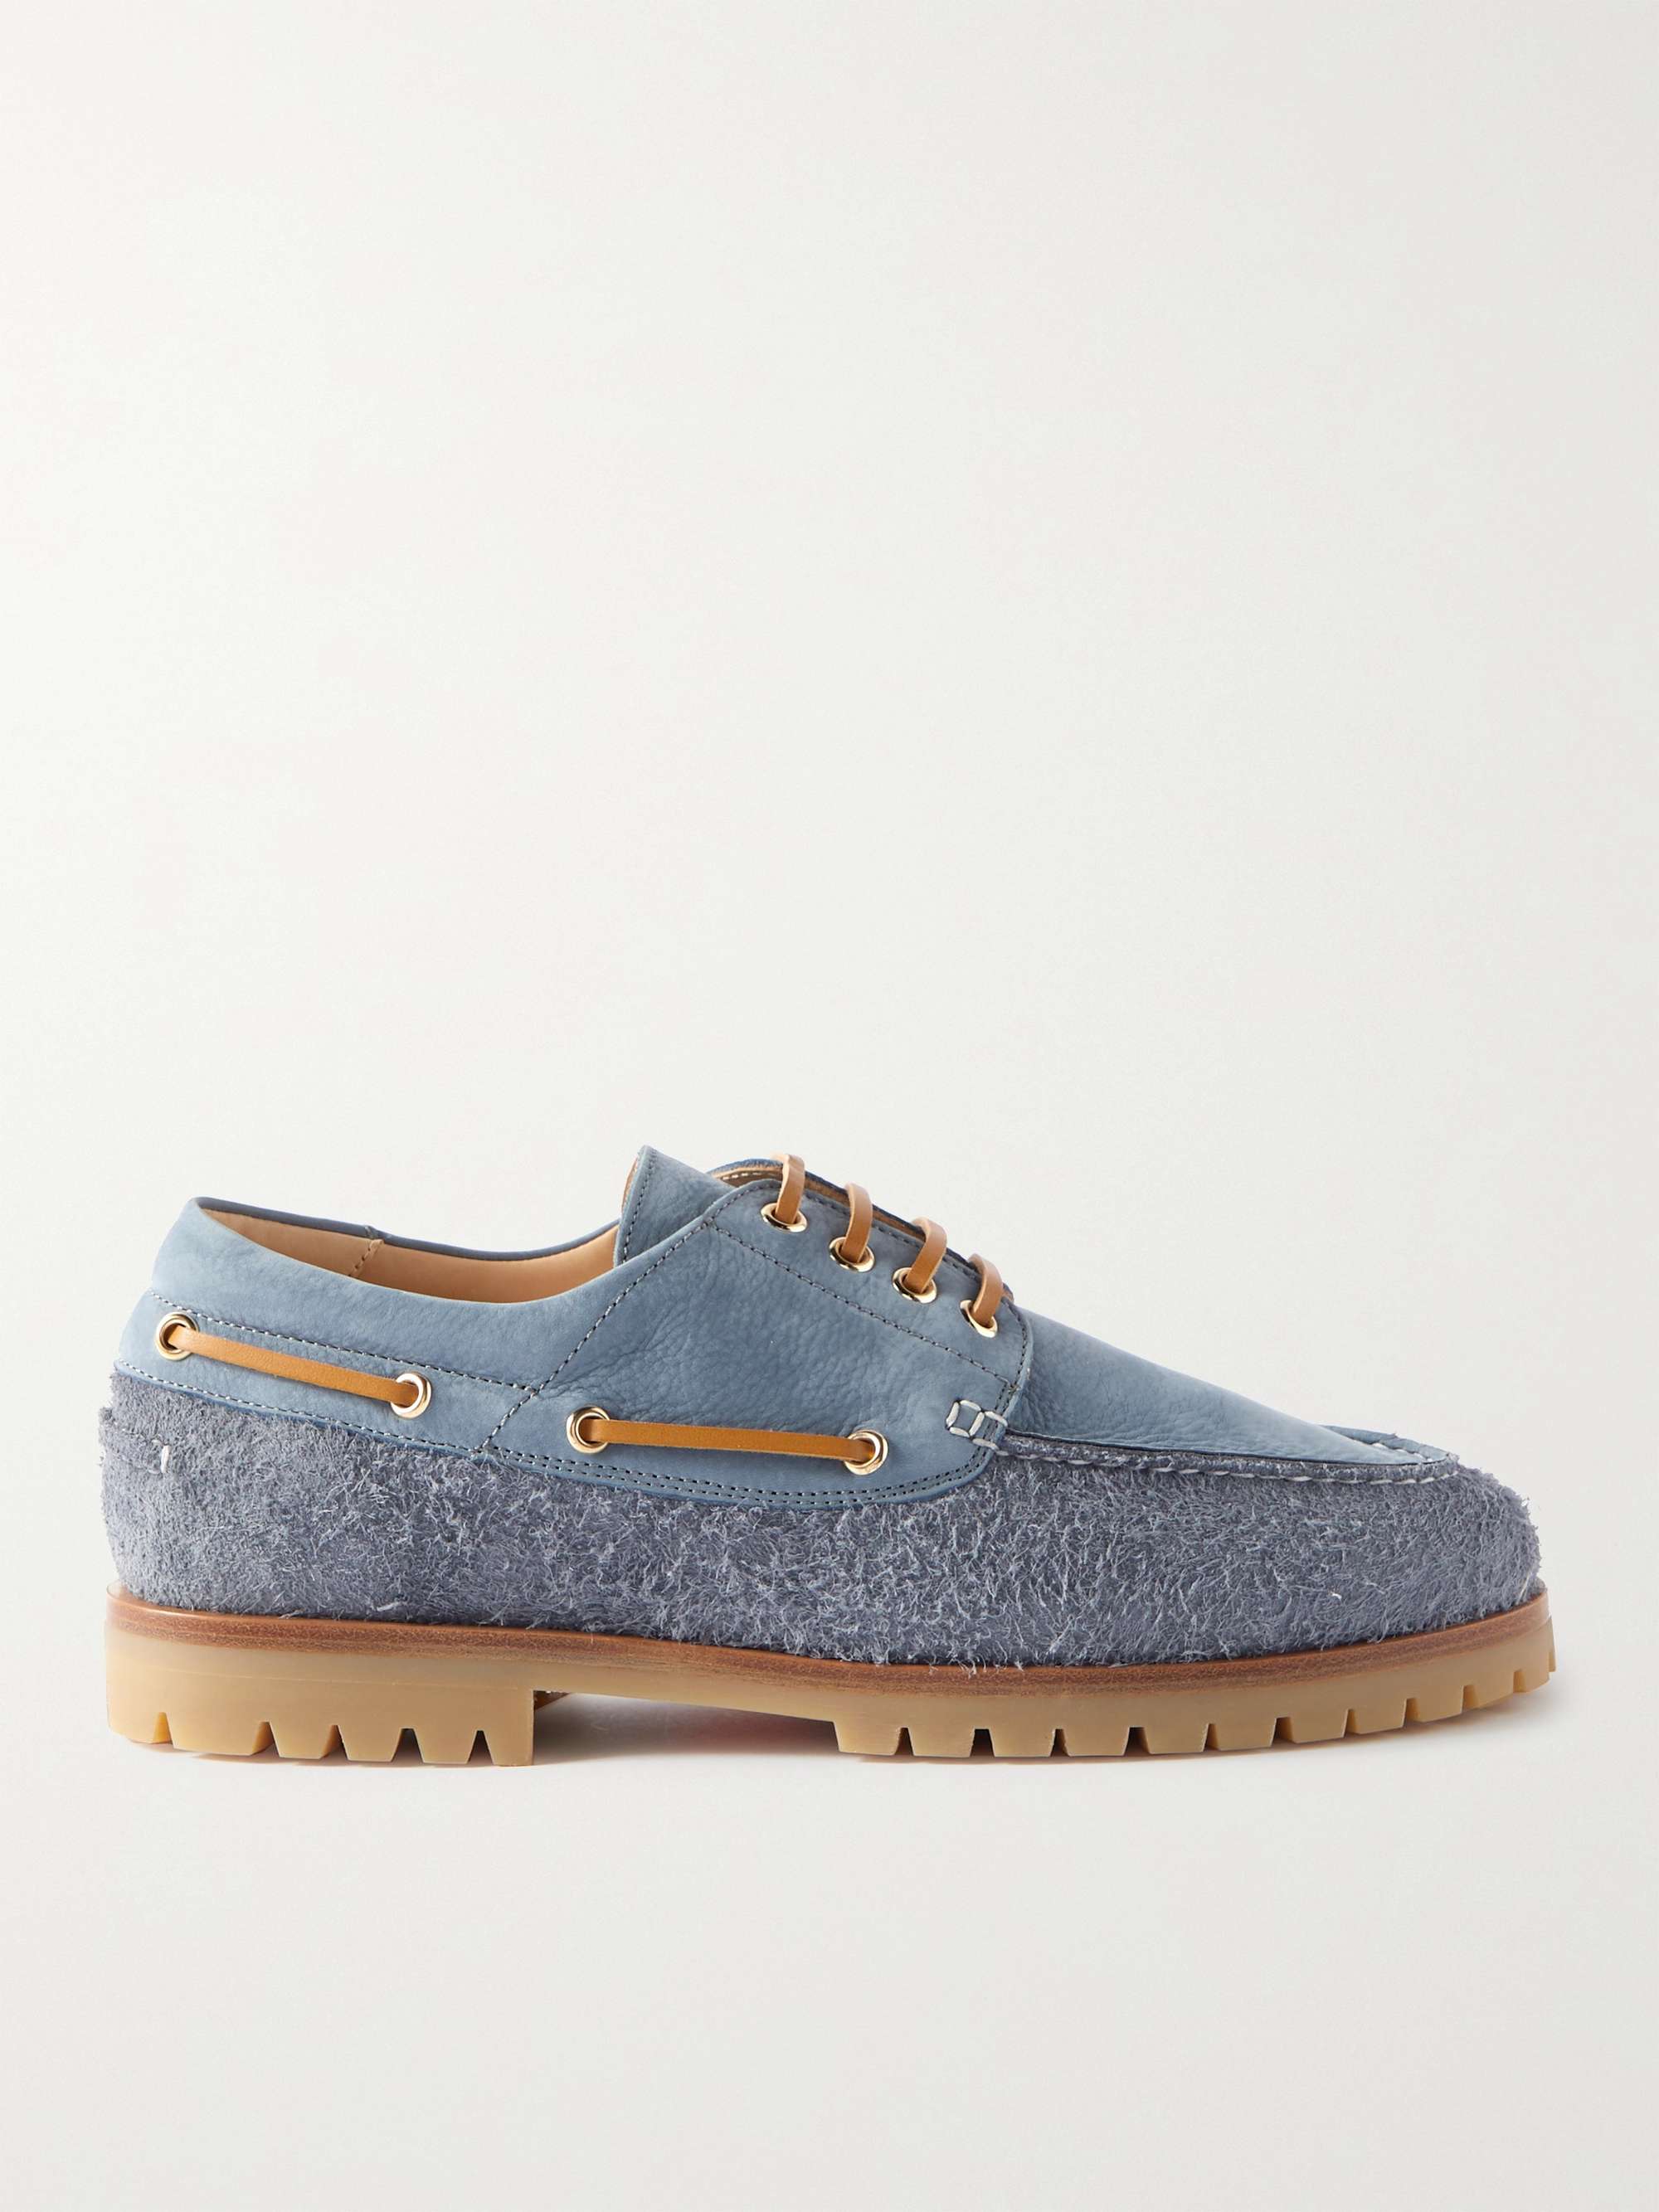 PAUL SMITH Jago Nubuck and Suede Boat Shoes